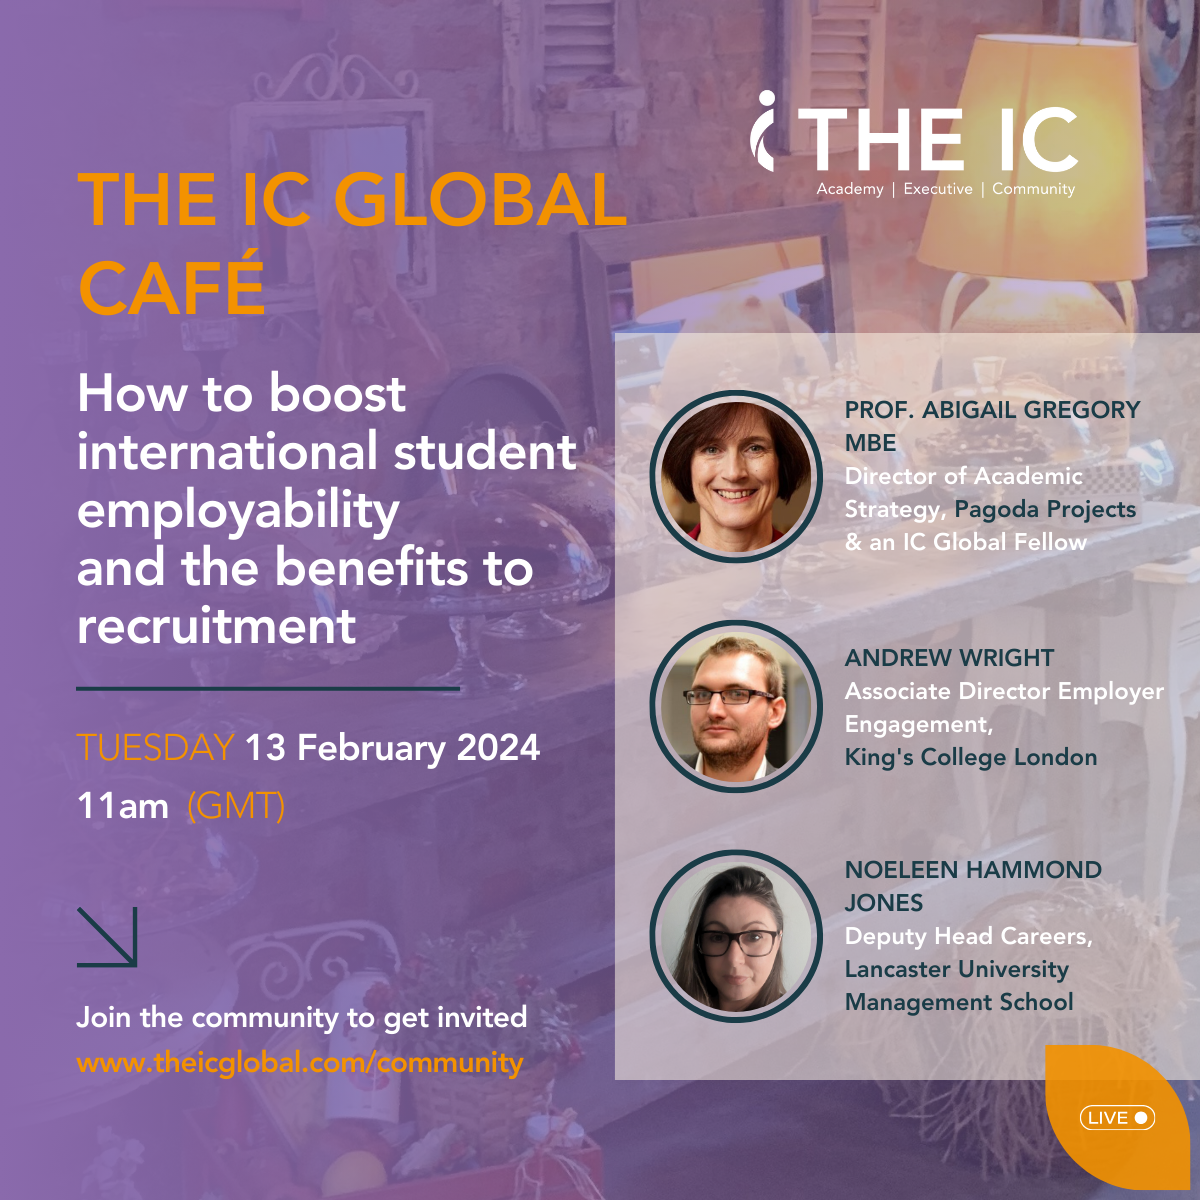 The IC Global Café: How to boost international student employability and the benefits to recruitment